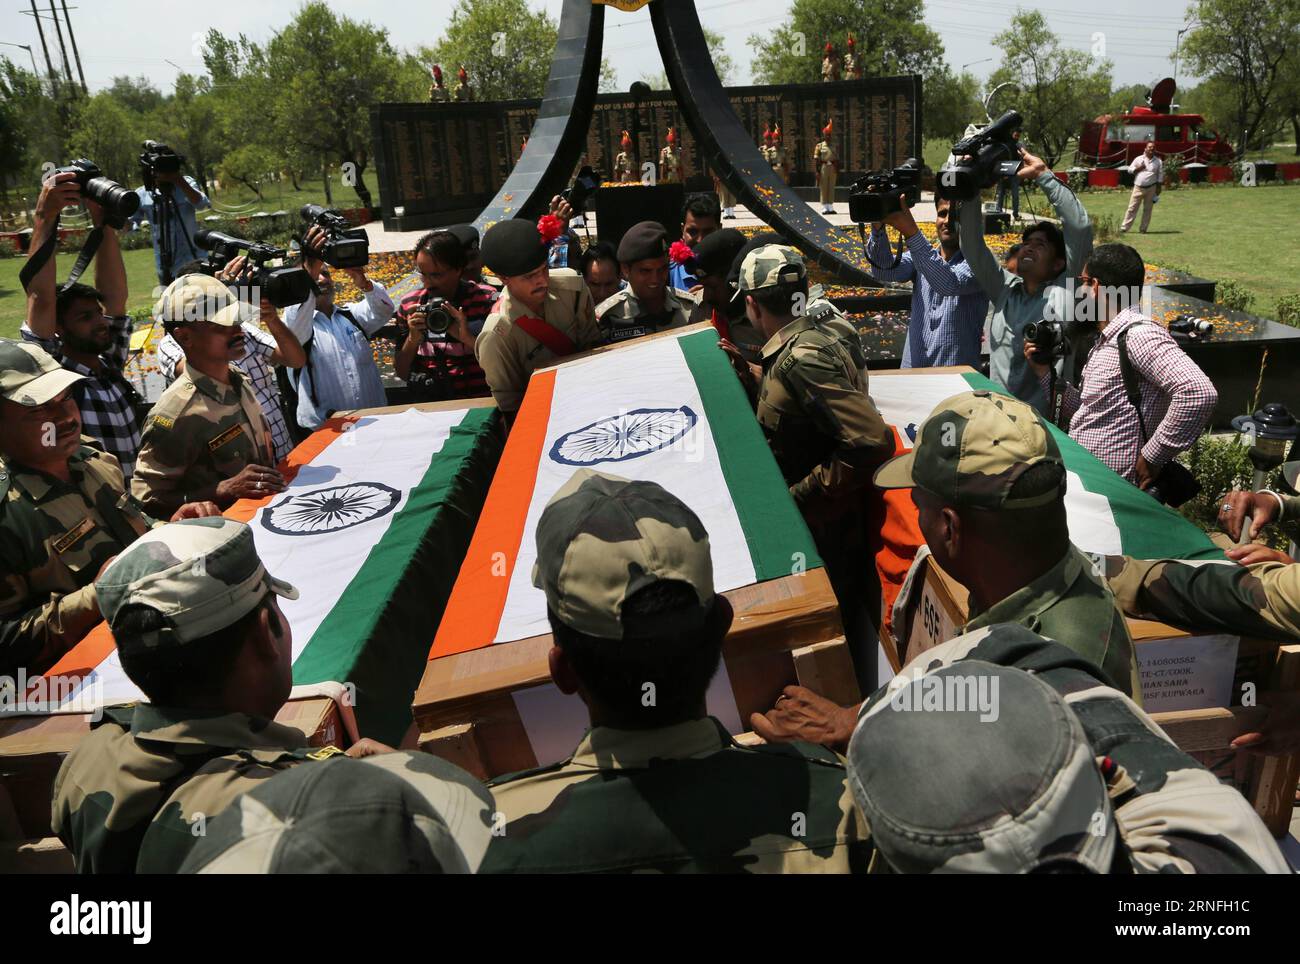 Indien - Beerdigung von Soldaten (160809) -- SRINAGAR, Aug. 9, 2016 -- India s Border Security Force personnel carry the coffins of slain troopers during wreath laying ceremony in Srinagar, summer capital of Indian-controlled Kashmir, on Aug. 9, 2016. Three Indian troops including a junior level officer and a militant were killed Monday in a fierce gunfight near the Line of Control (LoC), dividing Kashmir. ) (cyc) INDIAN-CONTROLLED KASHMIR-SRINAGAR-THREE BORDER GUARDS KILLED JavedxDar PUBLICATIONxNOTxINxCHN   India Funeral from Soldiers 160809 Srinagar Aug 9 2016 India S Border Security Force Stock Photo